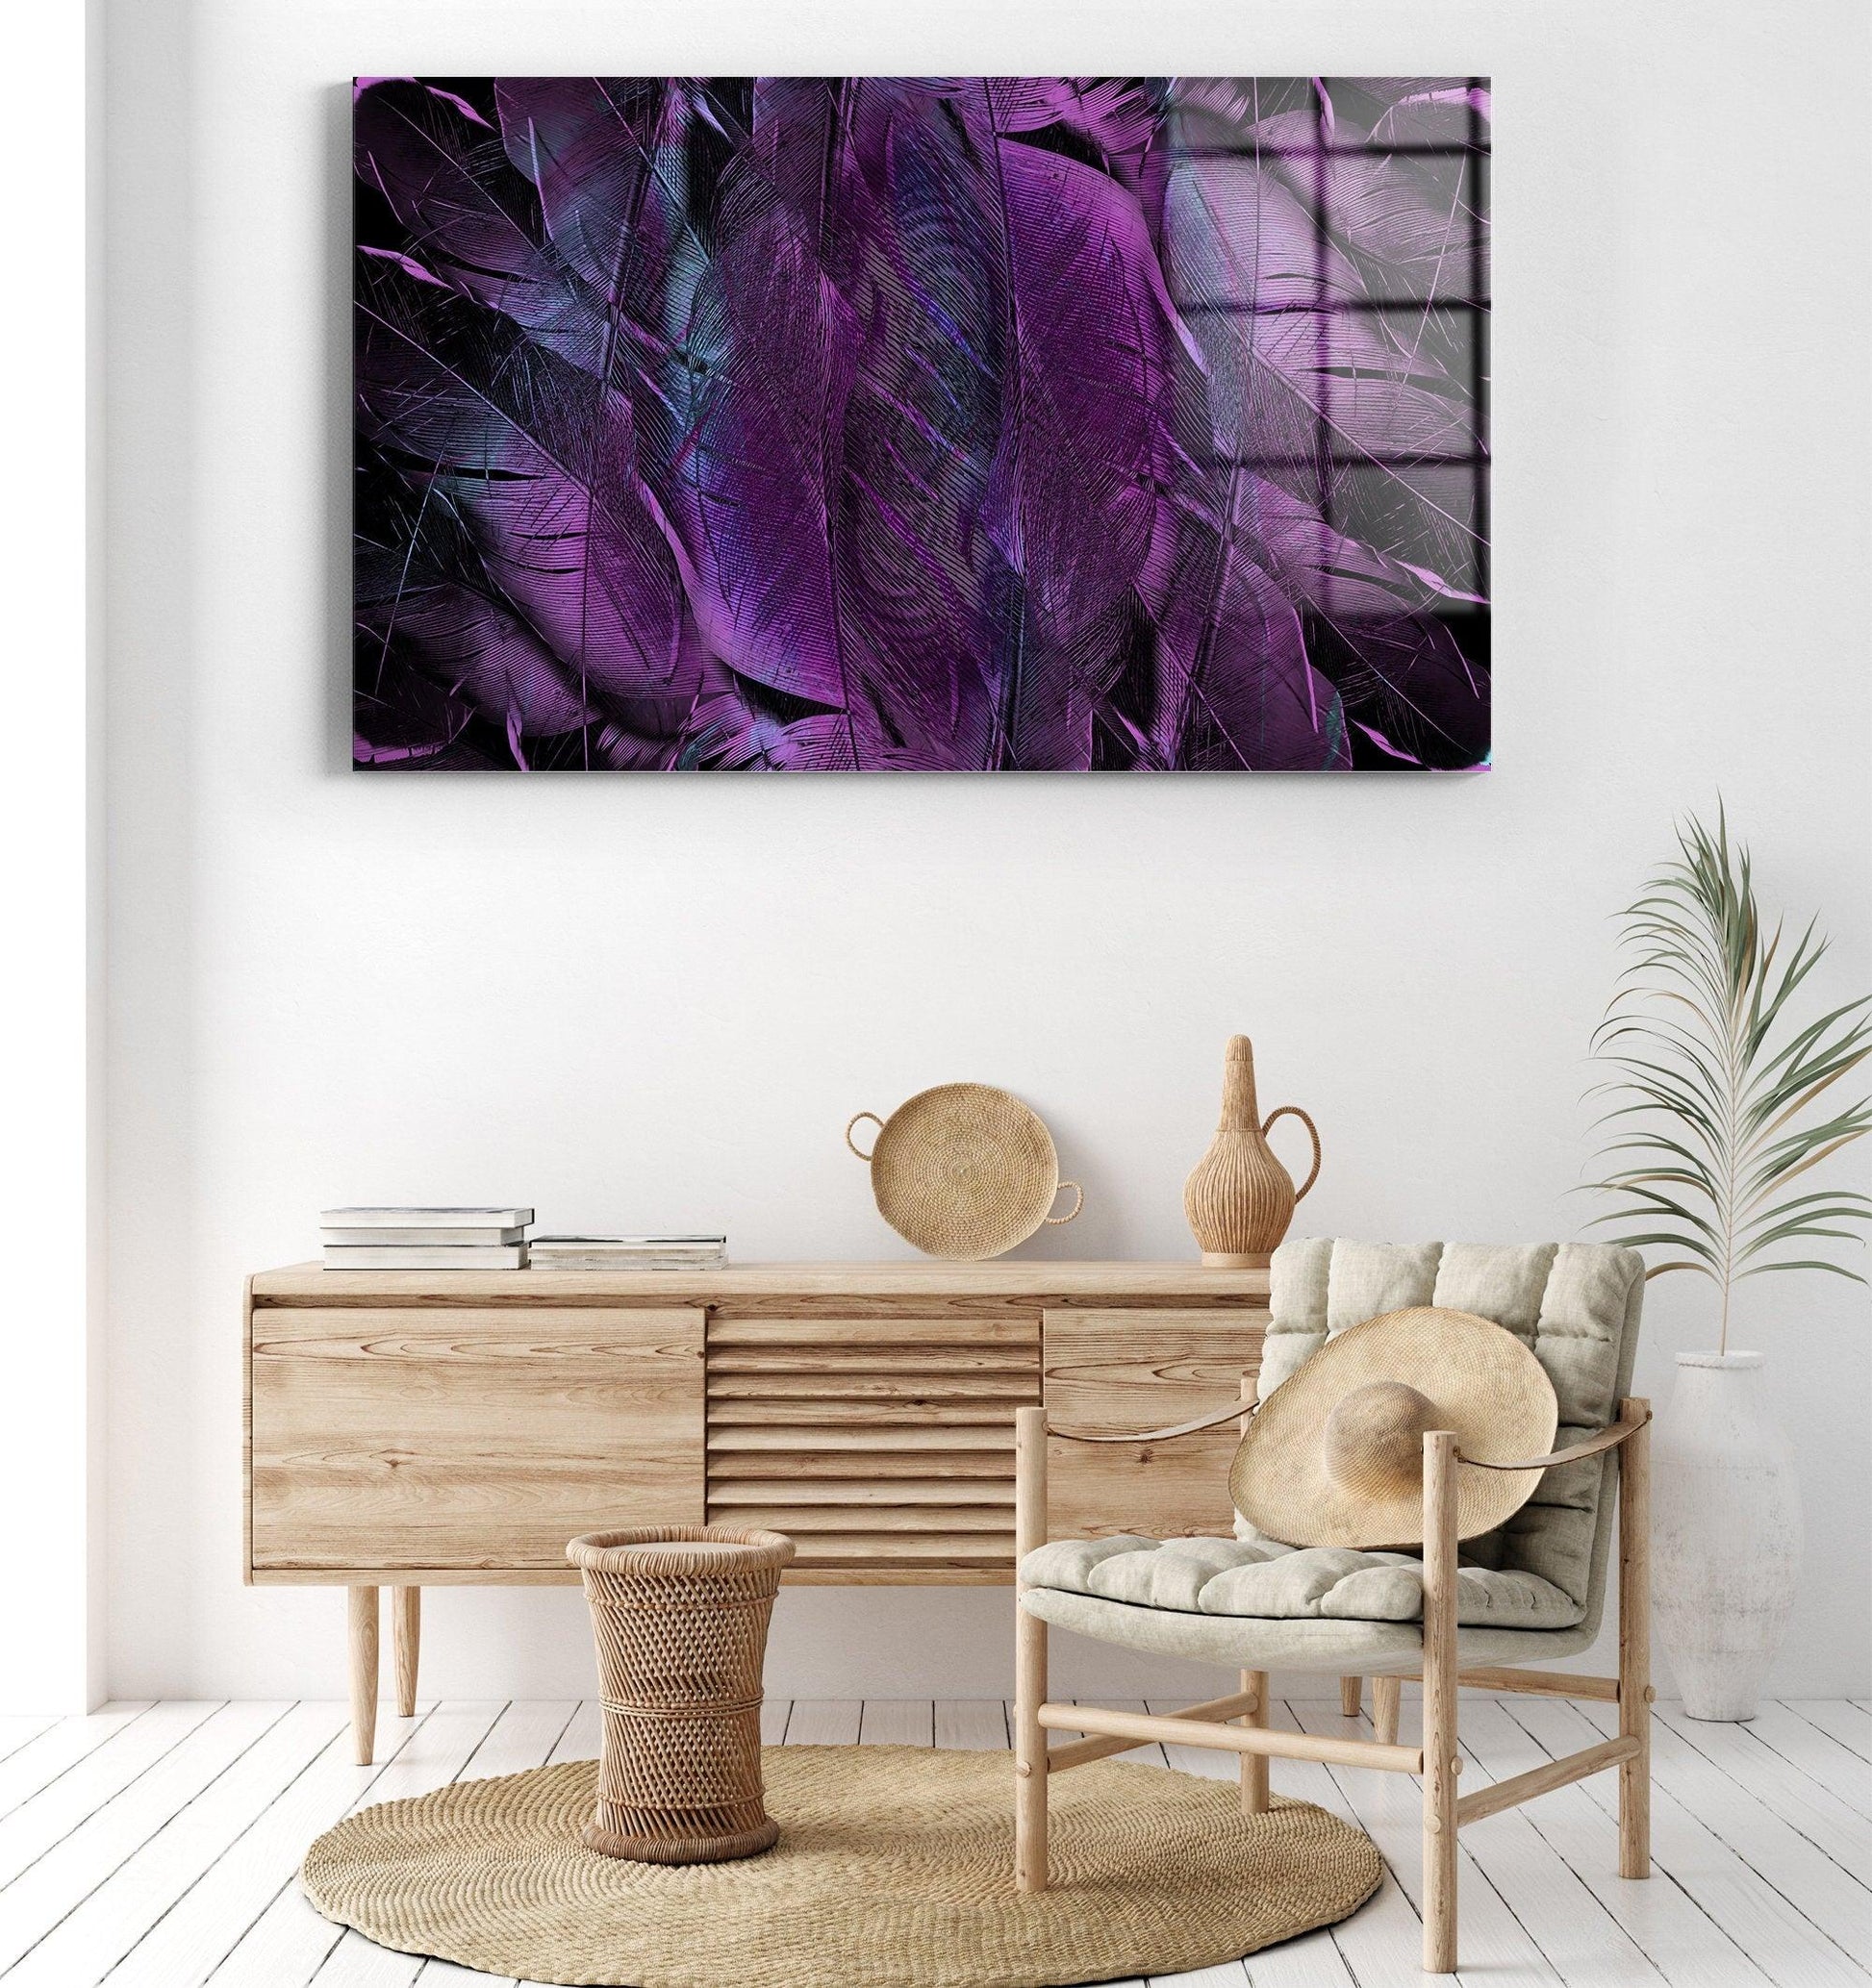 colorful Wall Art| UV Digital Printed, colorful Stones canvas wall art, stone Wall Decor, handmade furniture, stained glass wall art modern - TrendiArt